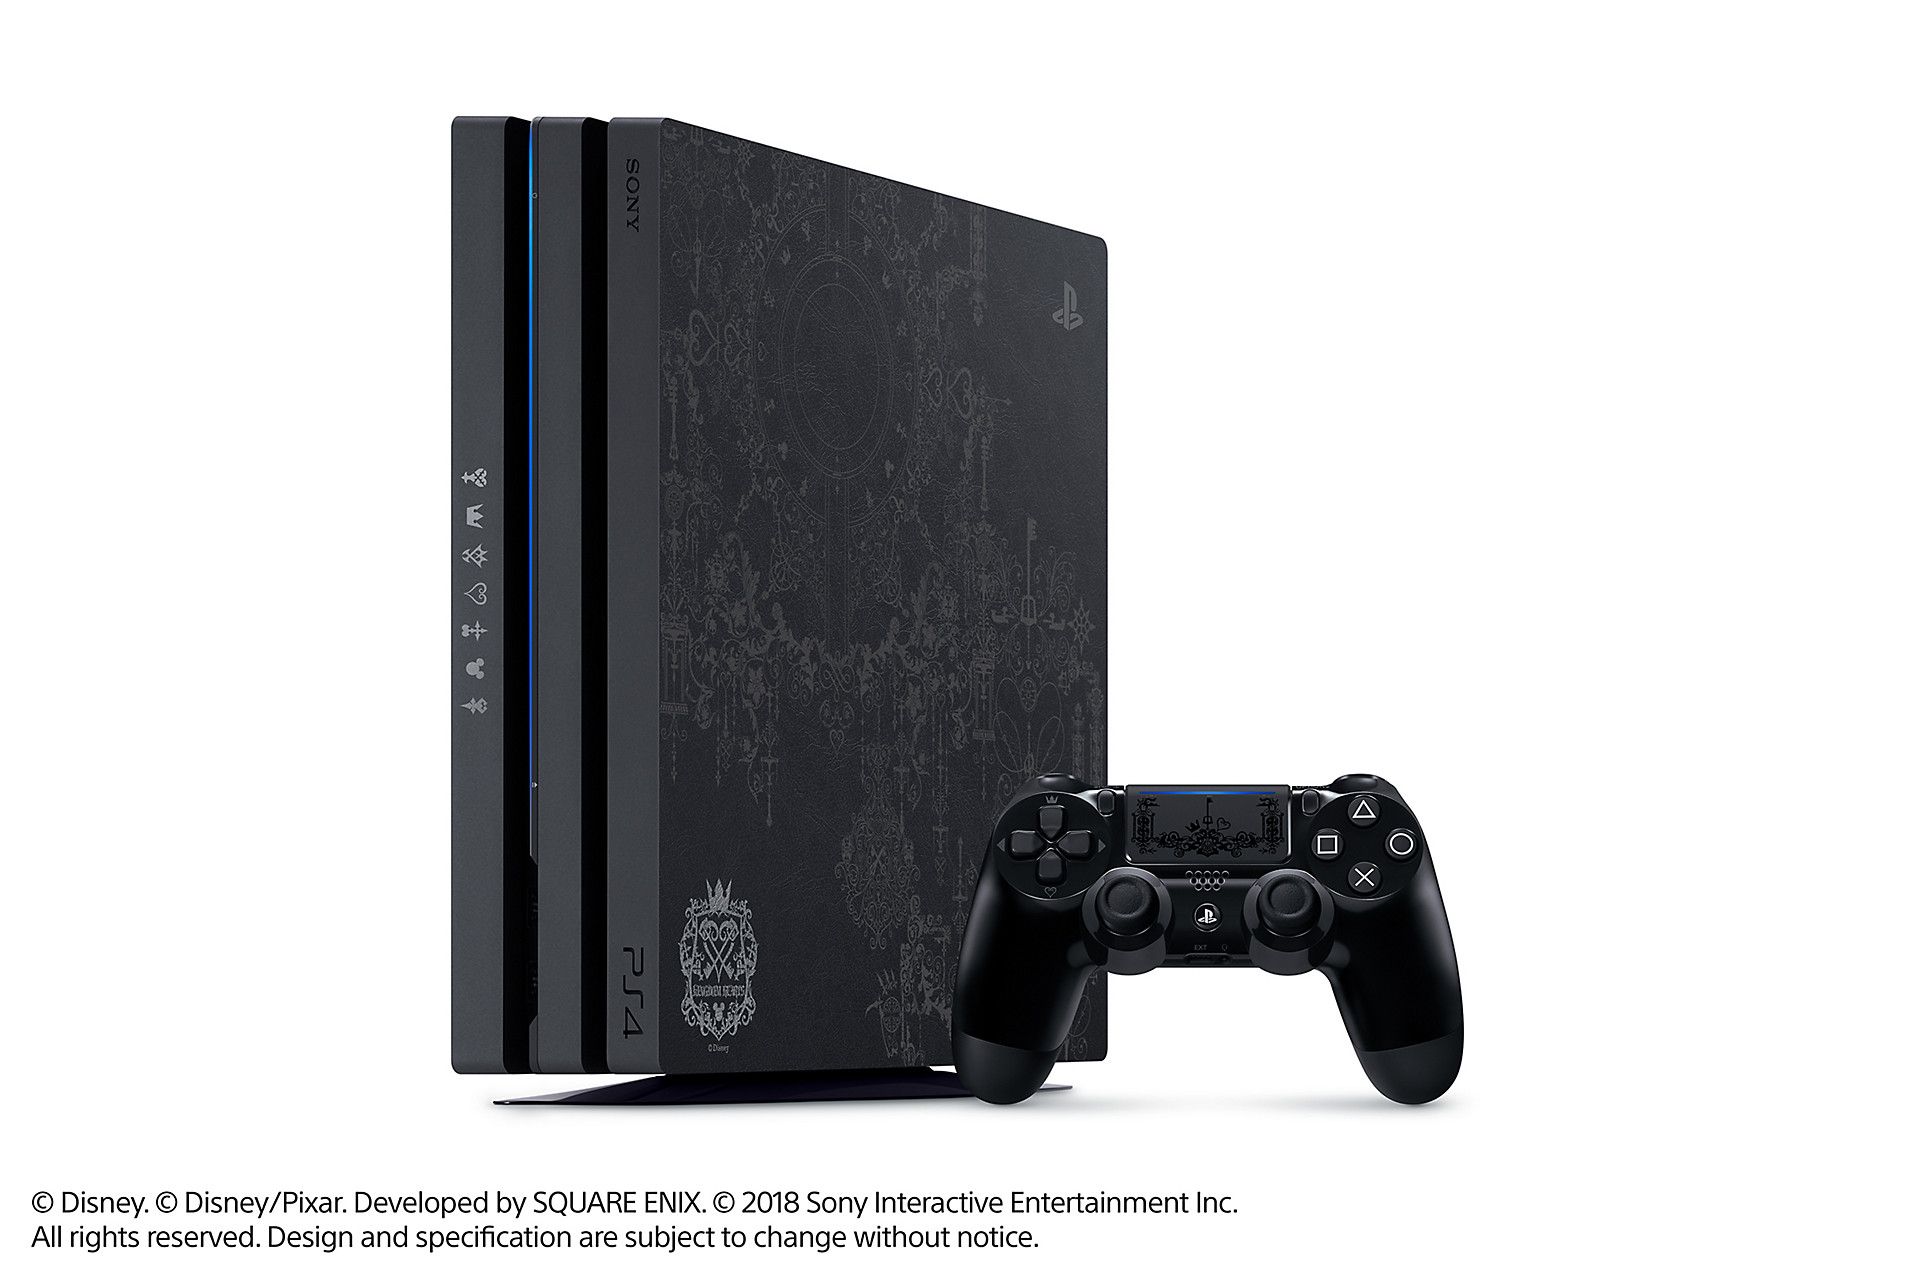 Kingdom Hearts 3' PS4 Pro Bundle Pre-Orders Live - Where to Buy